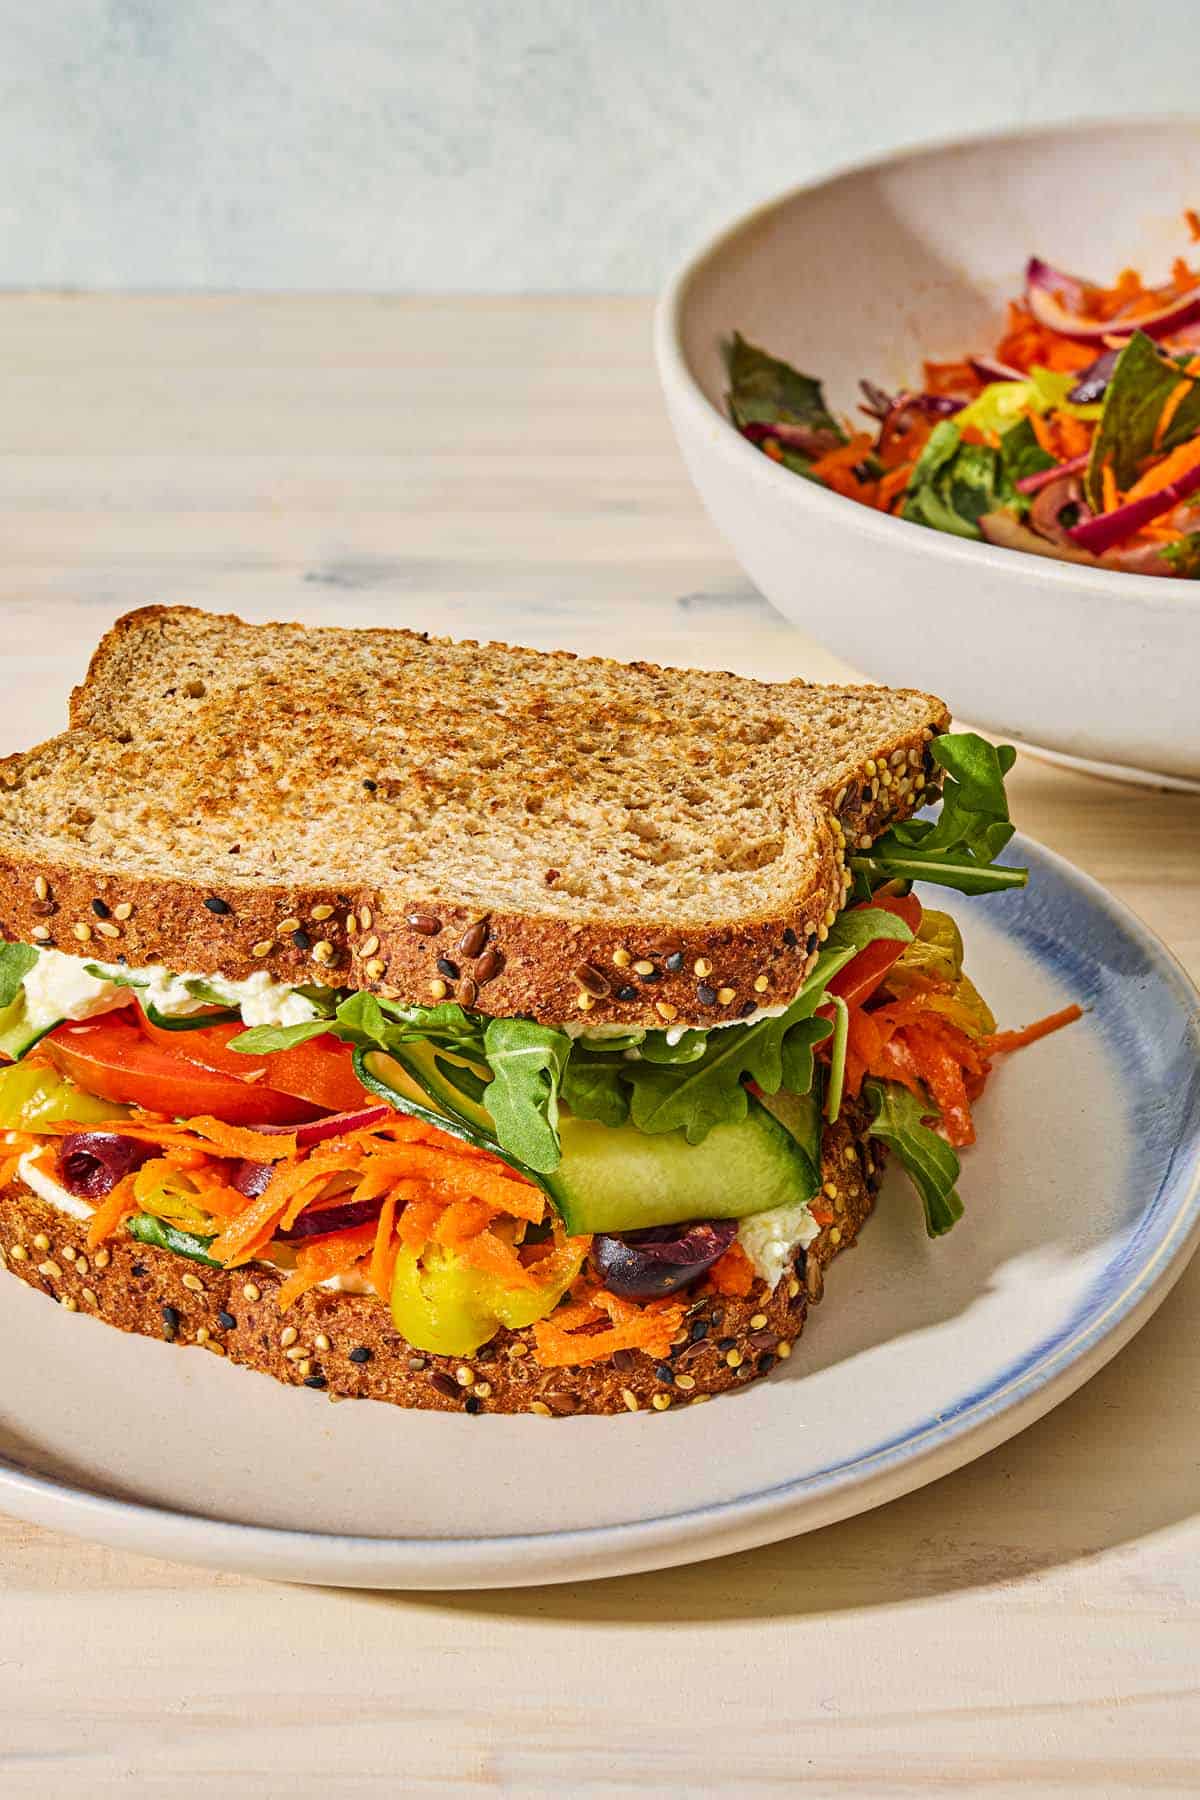 A veggie sandwich on a plate in front of a bowl of the Greek-style slaw.